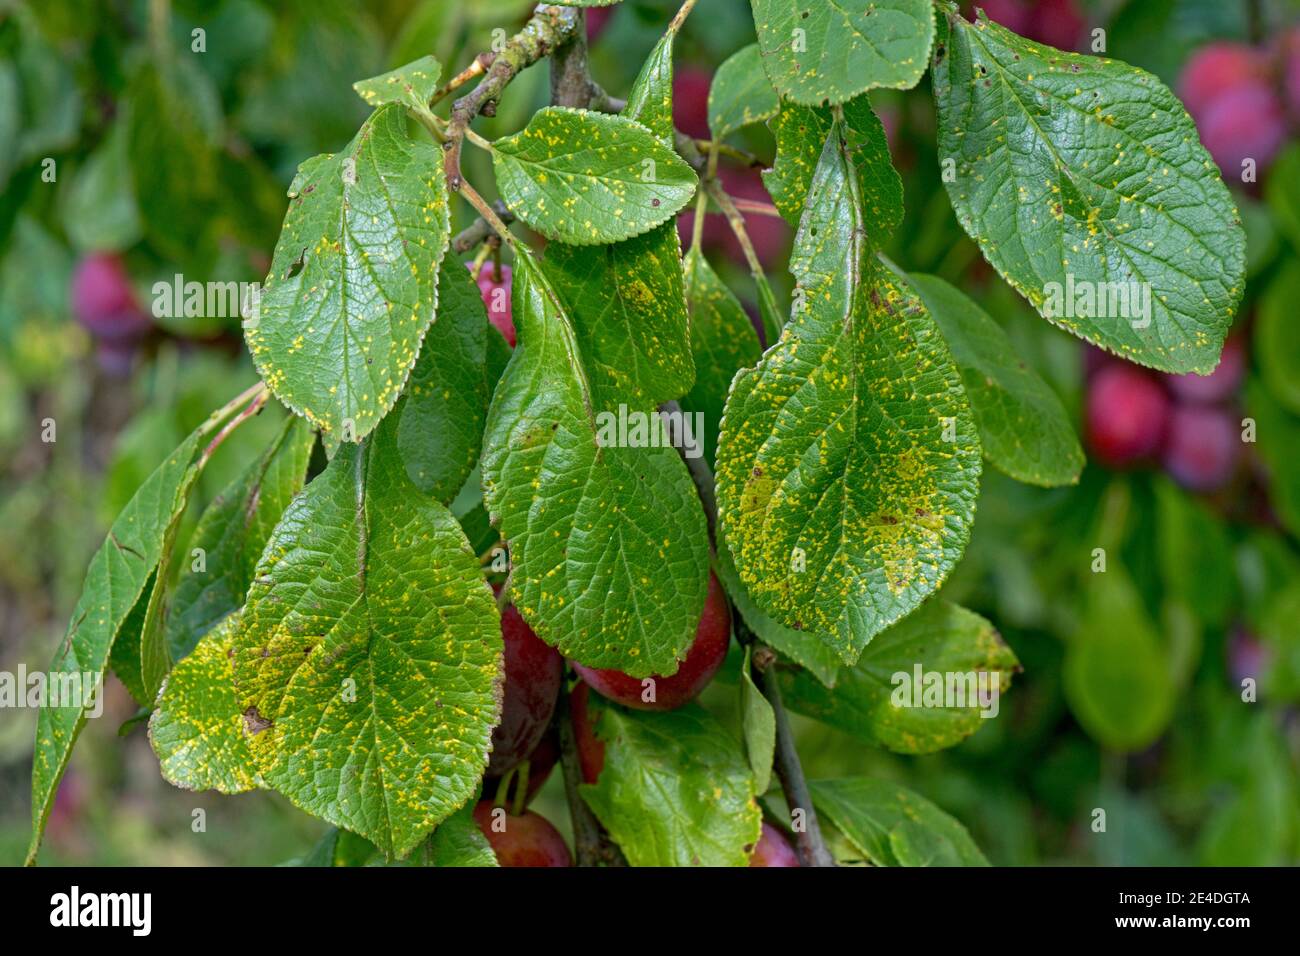 Plum rust (Tranzschelia pruni-spinosae var. discolor) yellow spot lesions on the upper surface of a Vctoria plum leaf, Berkshire,  August Stock Photo